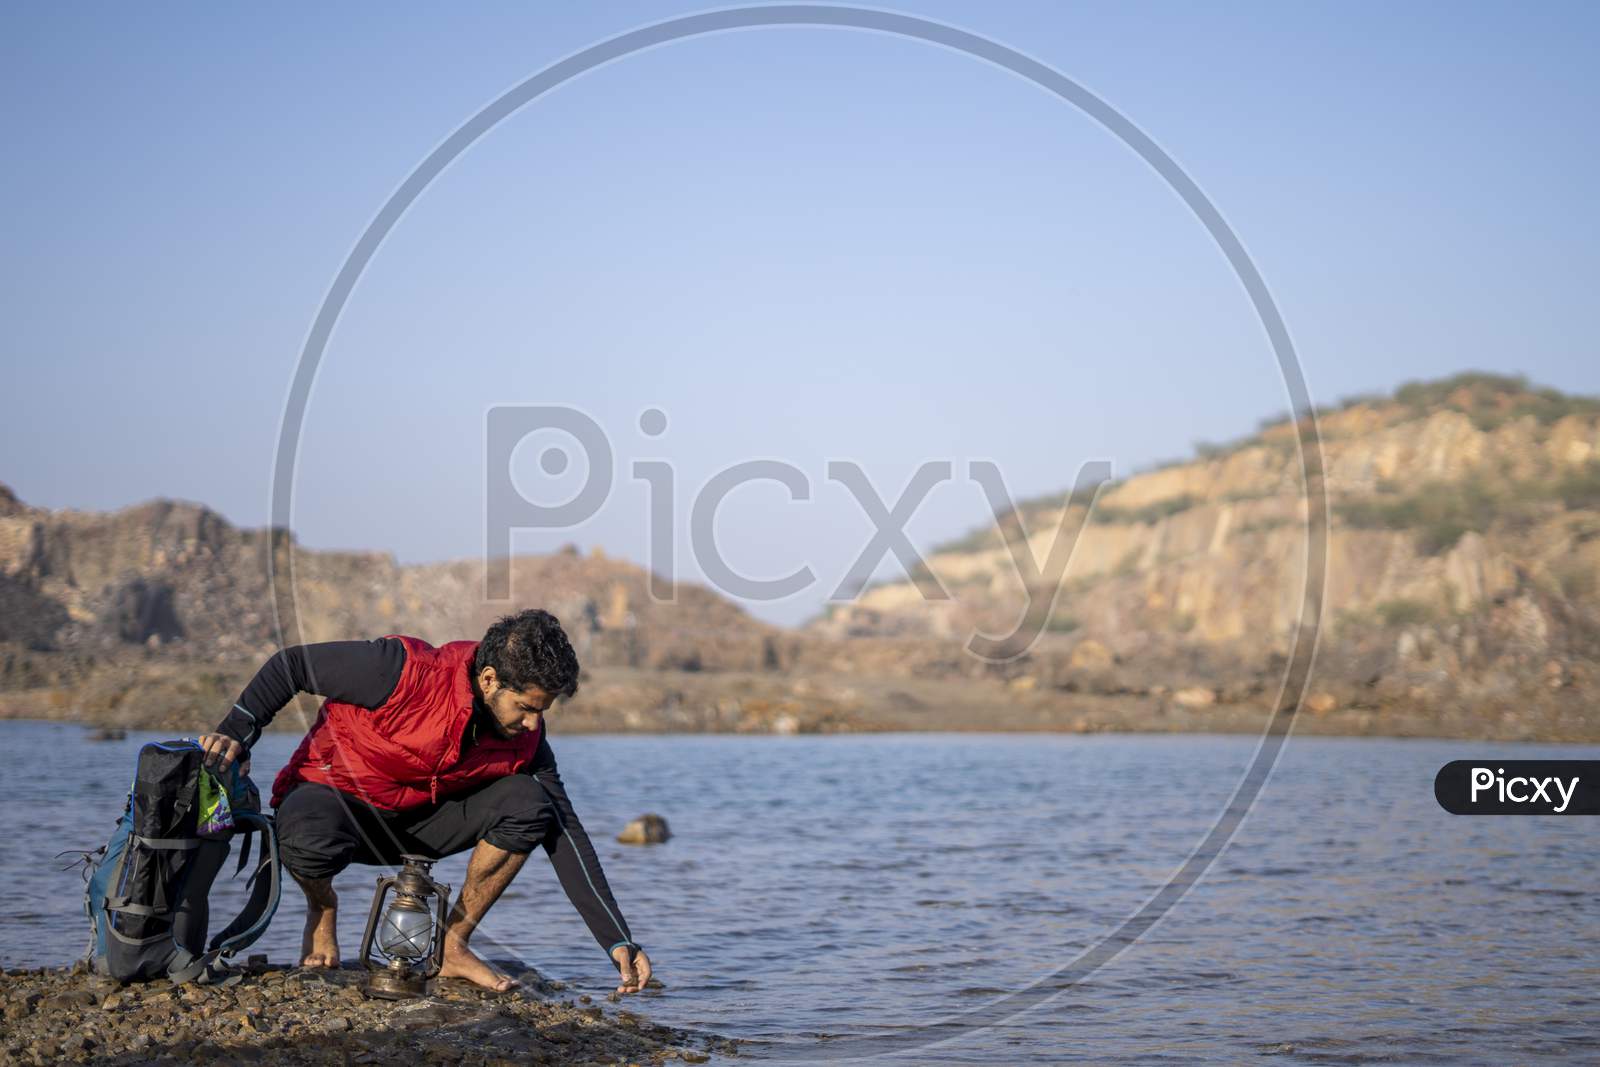 Young Indian Traveler Getting Ready For Camping In The Mountains, Sitting Near A Lake With His Backpack. Getting Water For Camping. Freedom And Adventure Concept.